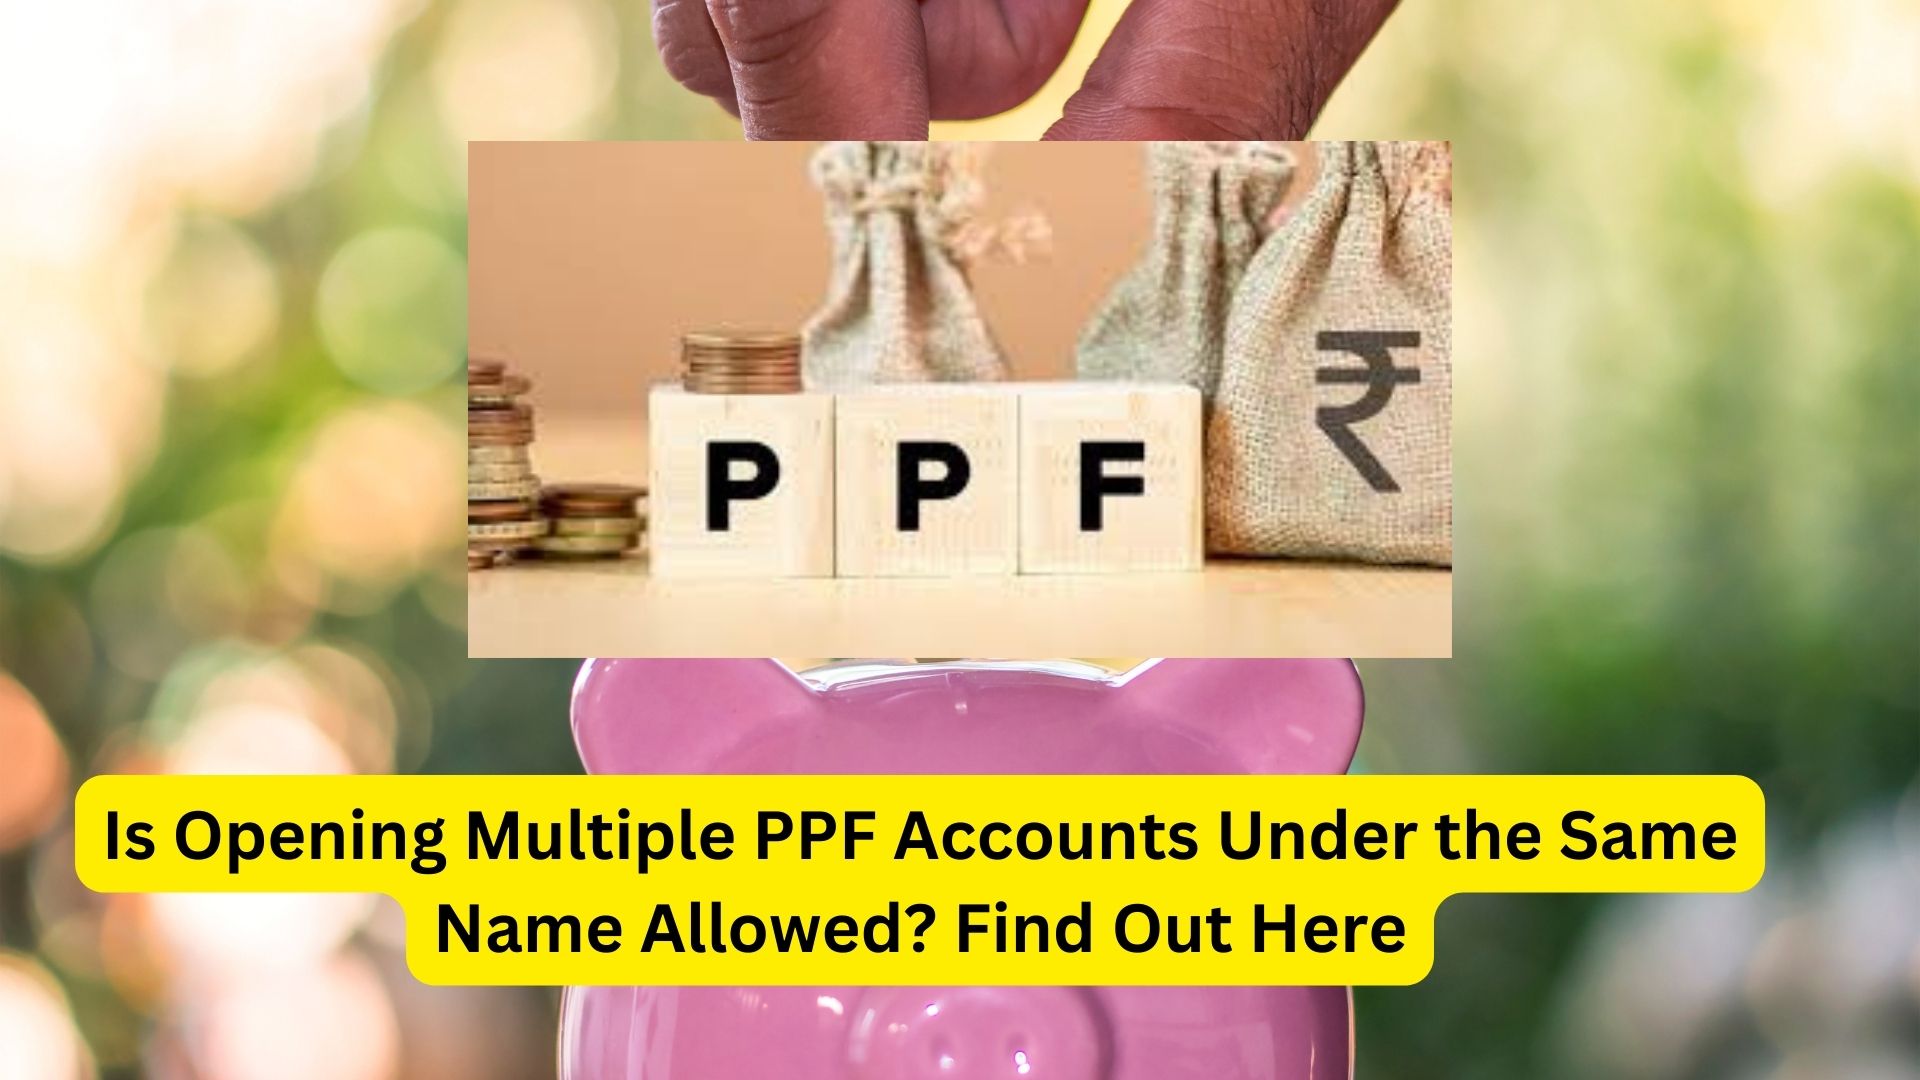 Is Opening Multiple PPF Accounts Under the Same Name Allowed? Find Out Here